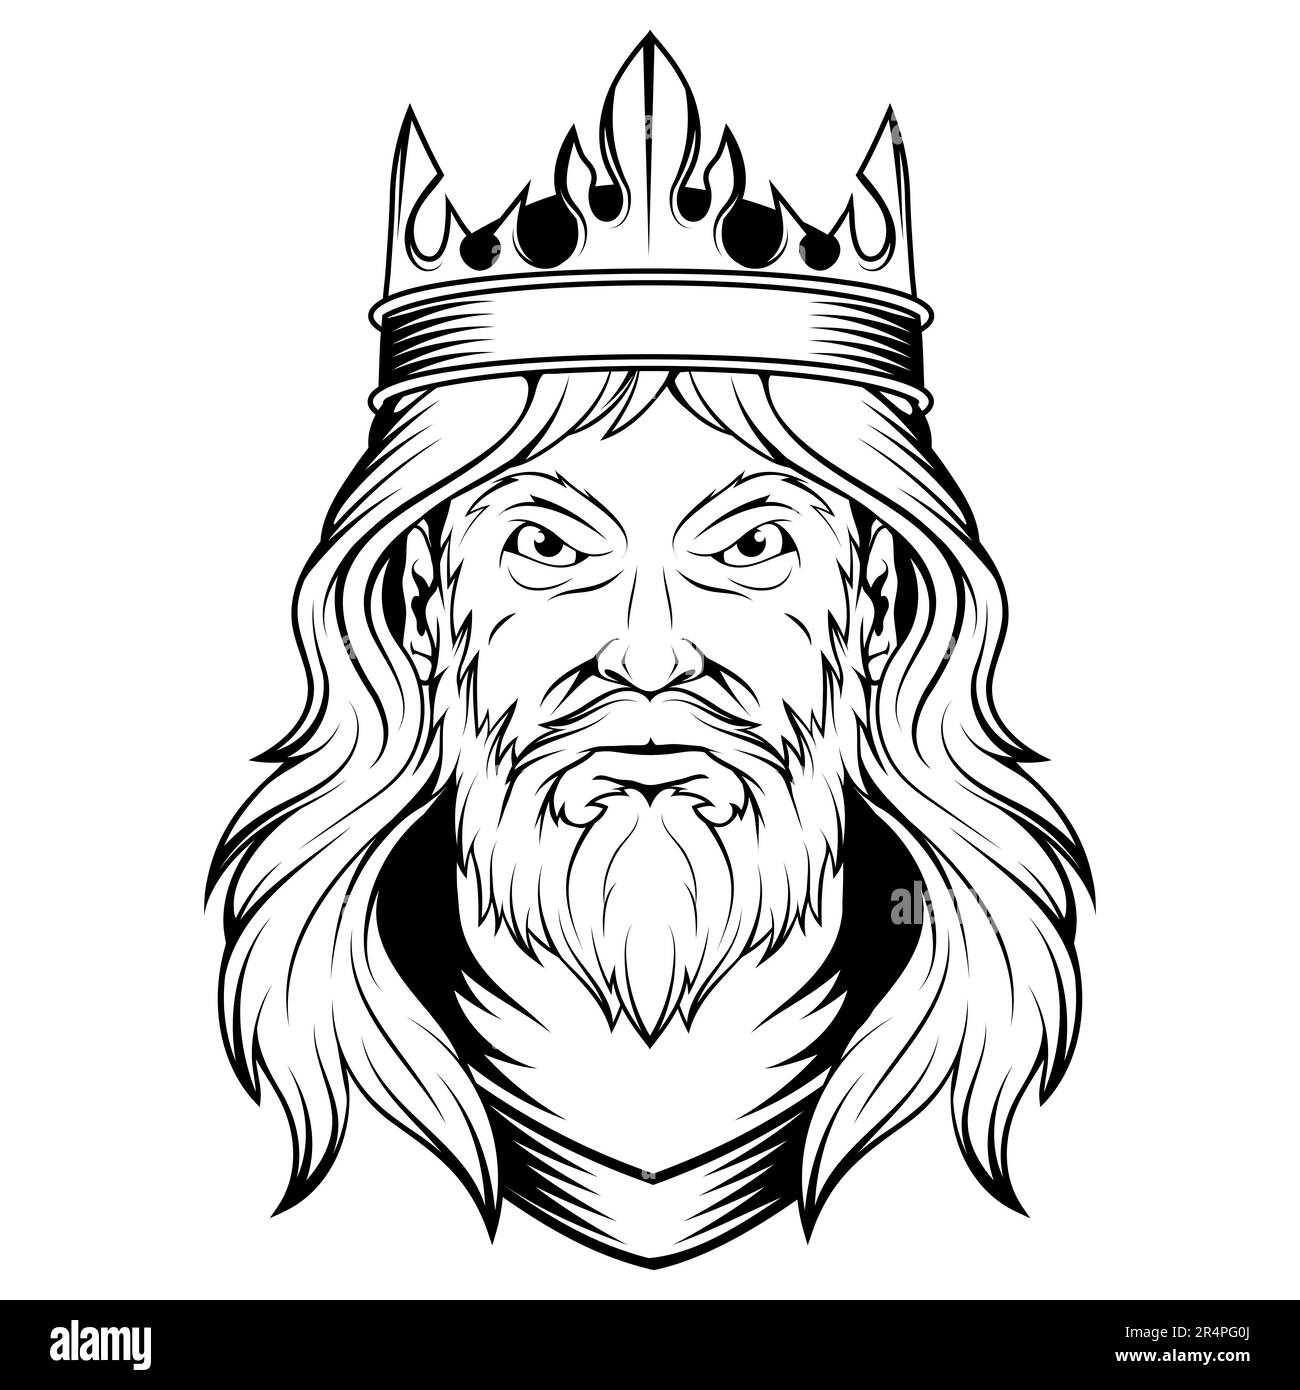 King. Vector illustration of a sketch warrior king. A strong, brave king with a crown on his head. Stock Vector